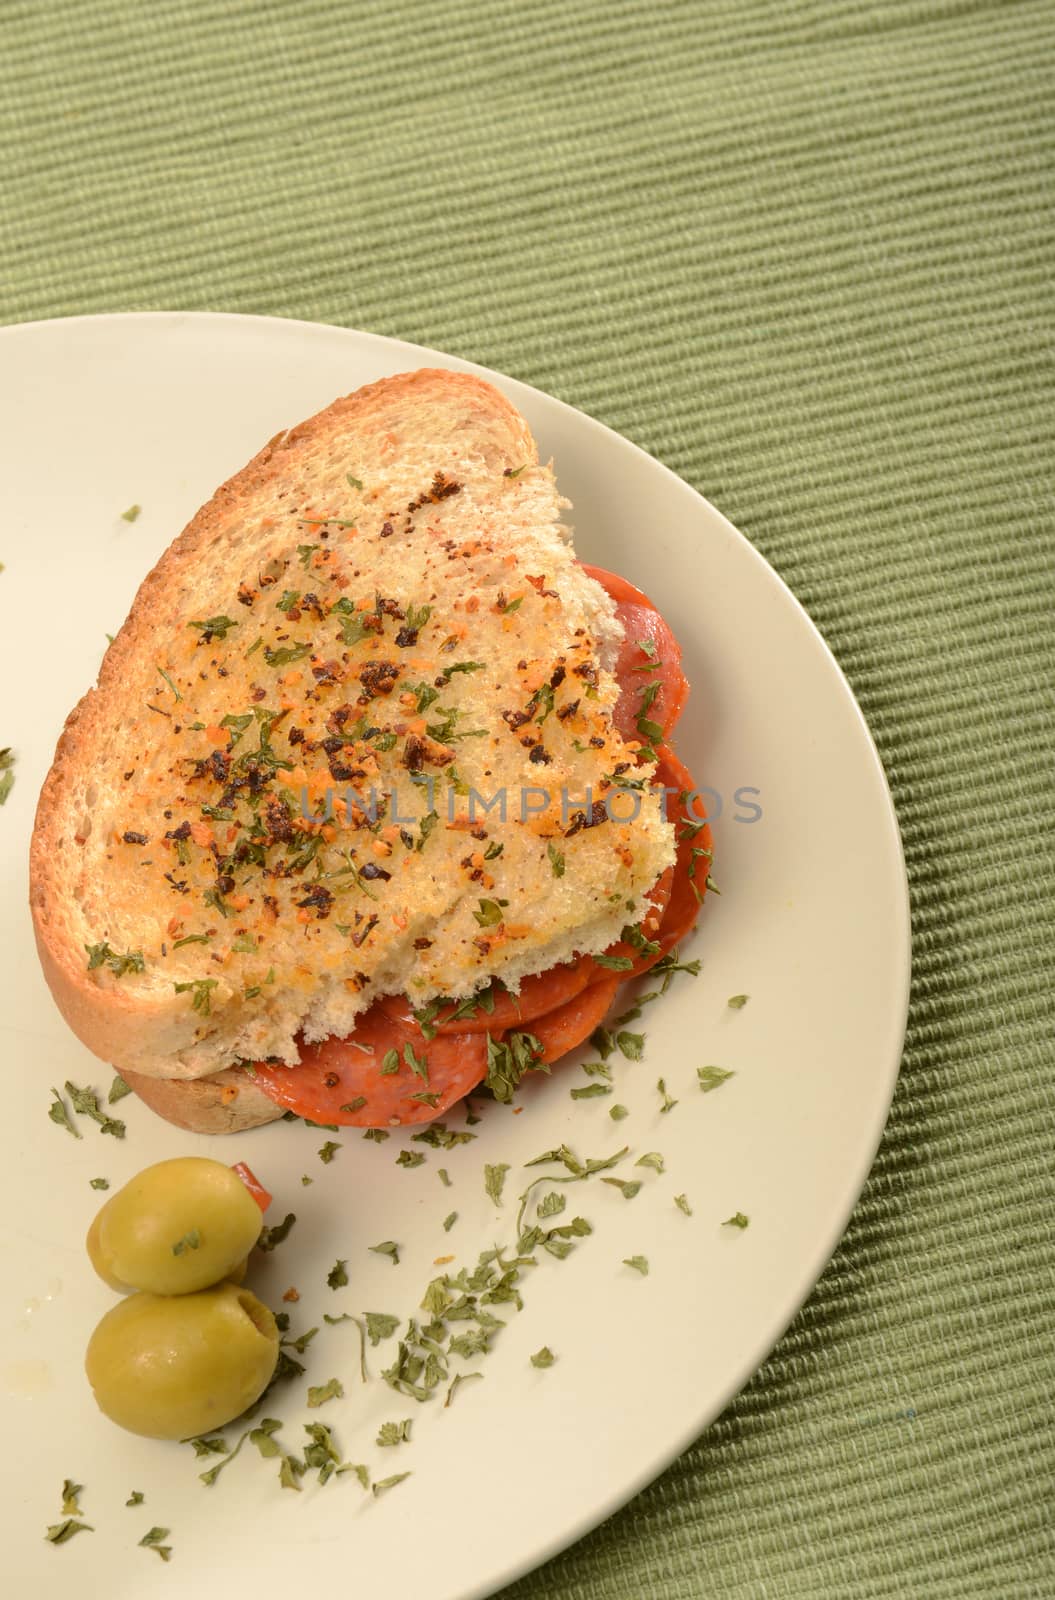 pepperoni sandwich with green olives by ftlaudgirl